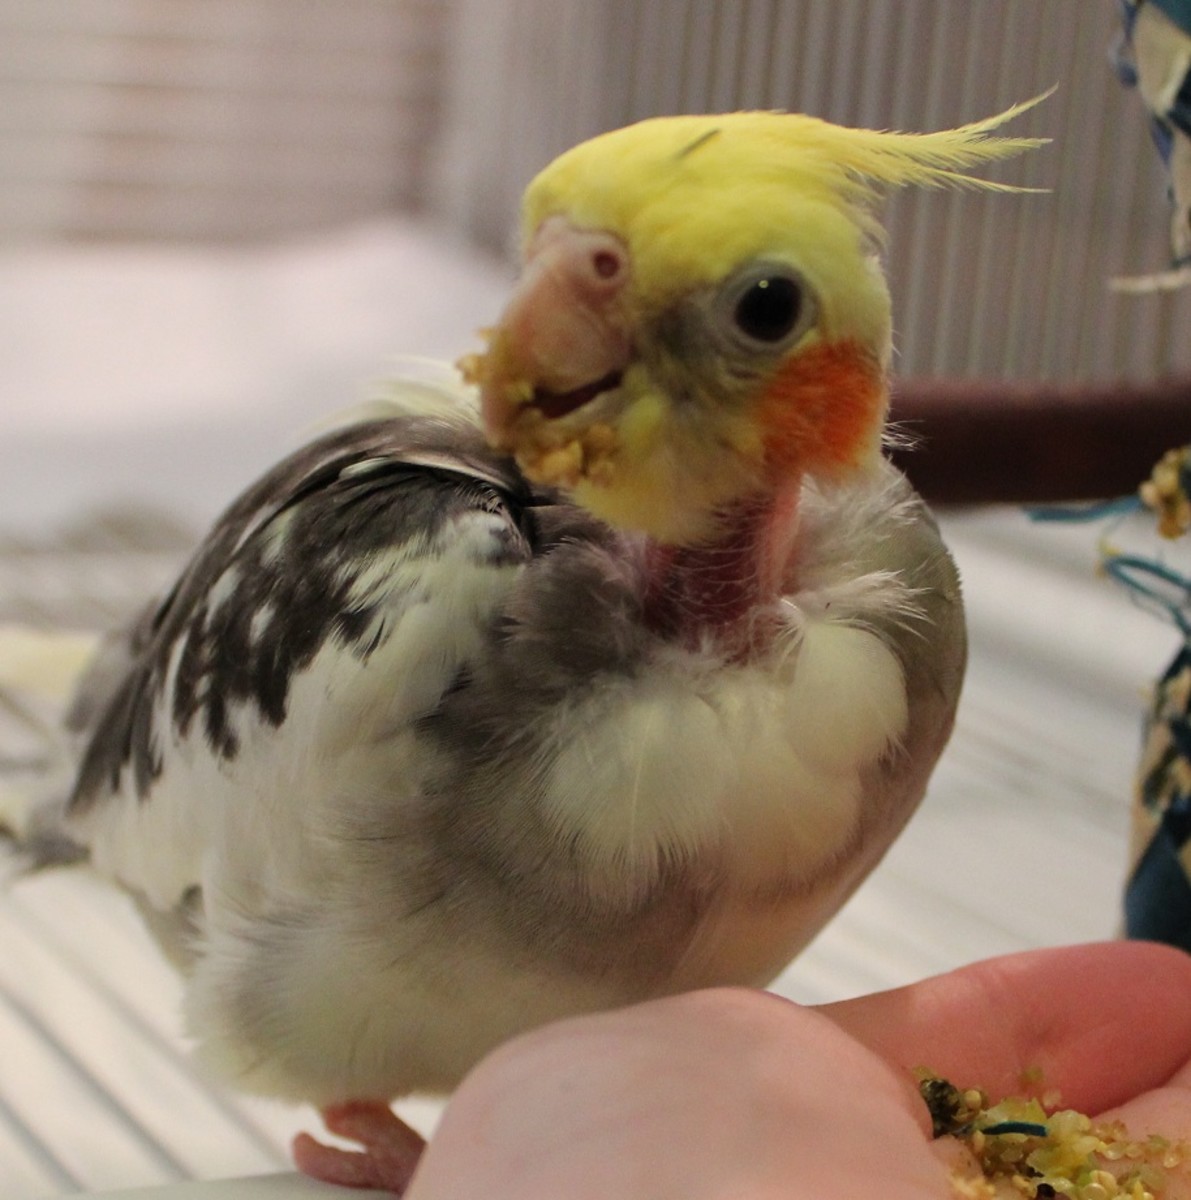 Buzzy, the author's rescue cockatiel, enjoying a dinner of pureed vegetables and cooked grains.